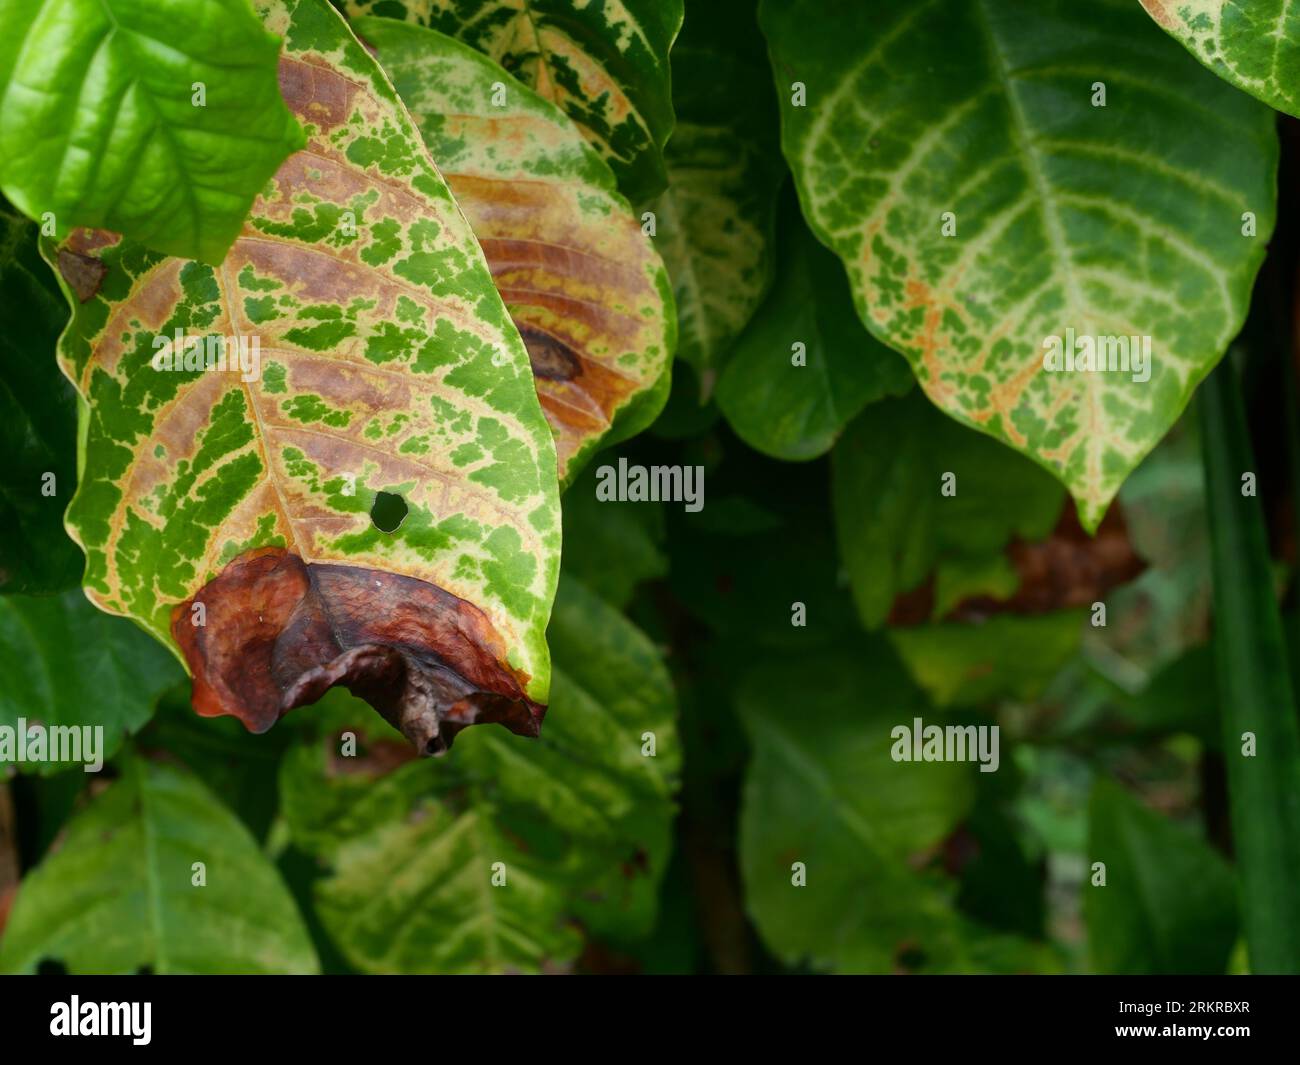 Brown spotted and yellow damage by anthracnose on the green leaf of Robusta coffee plant tree, Plant diseases that damage agriculture Stock Photo